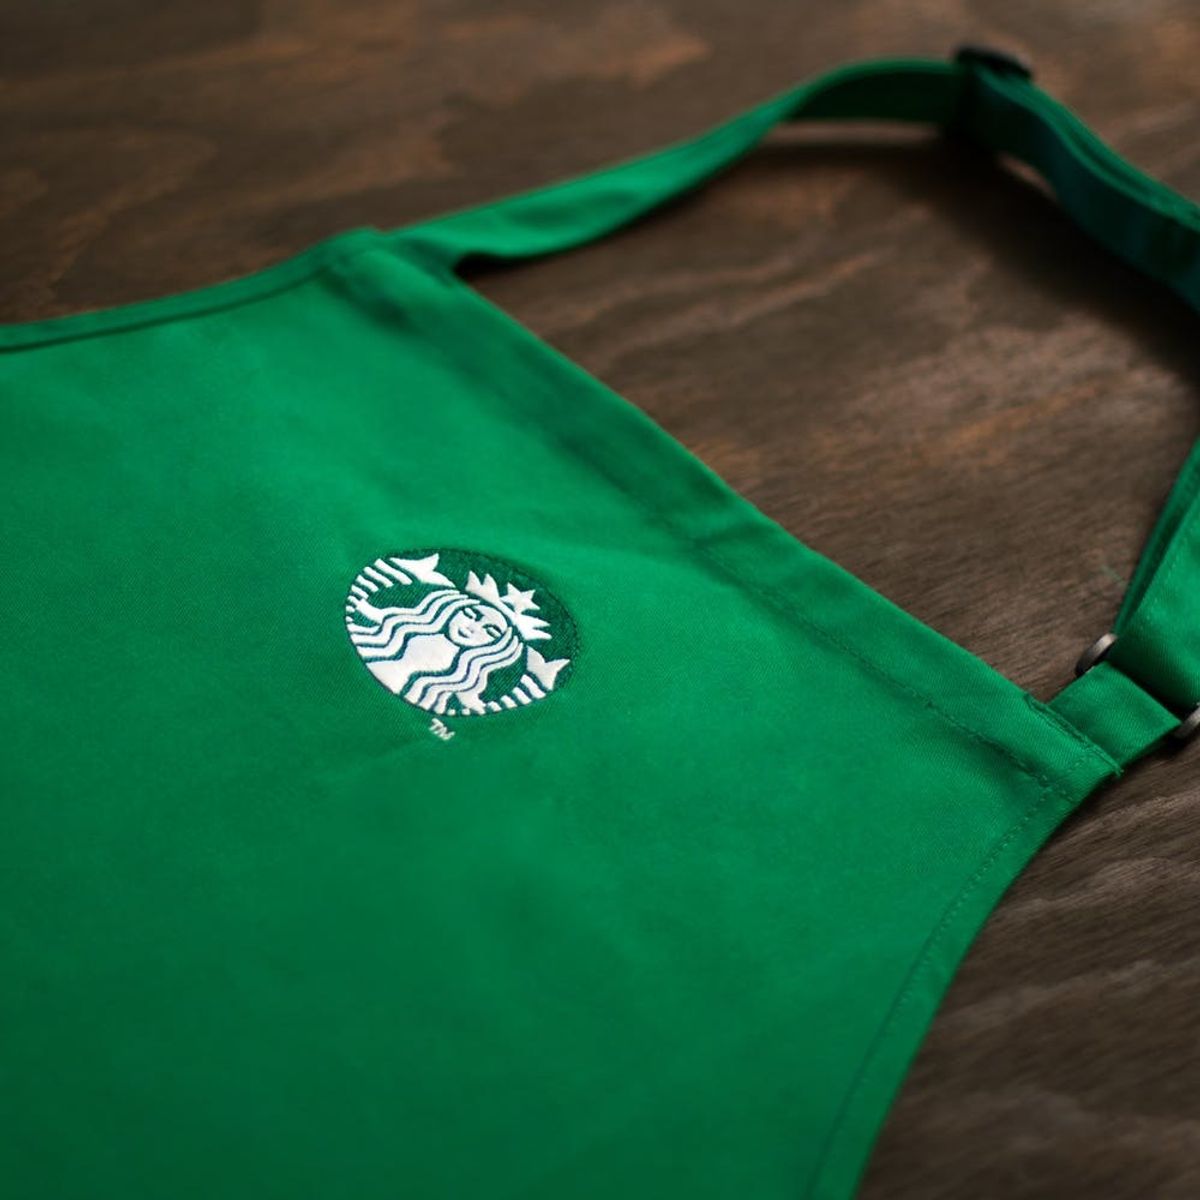 Here’s the *Real* Reason Starbucks Baristas Wear Those Green Aprons